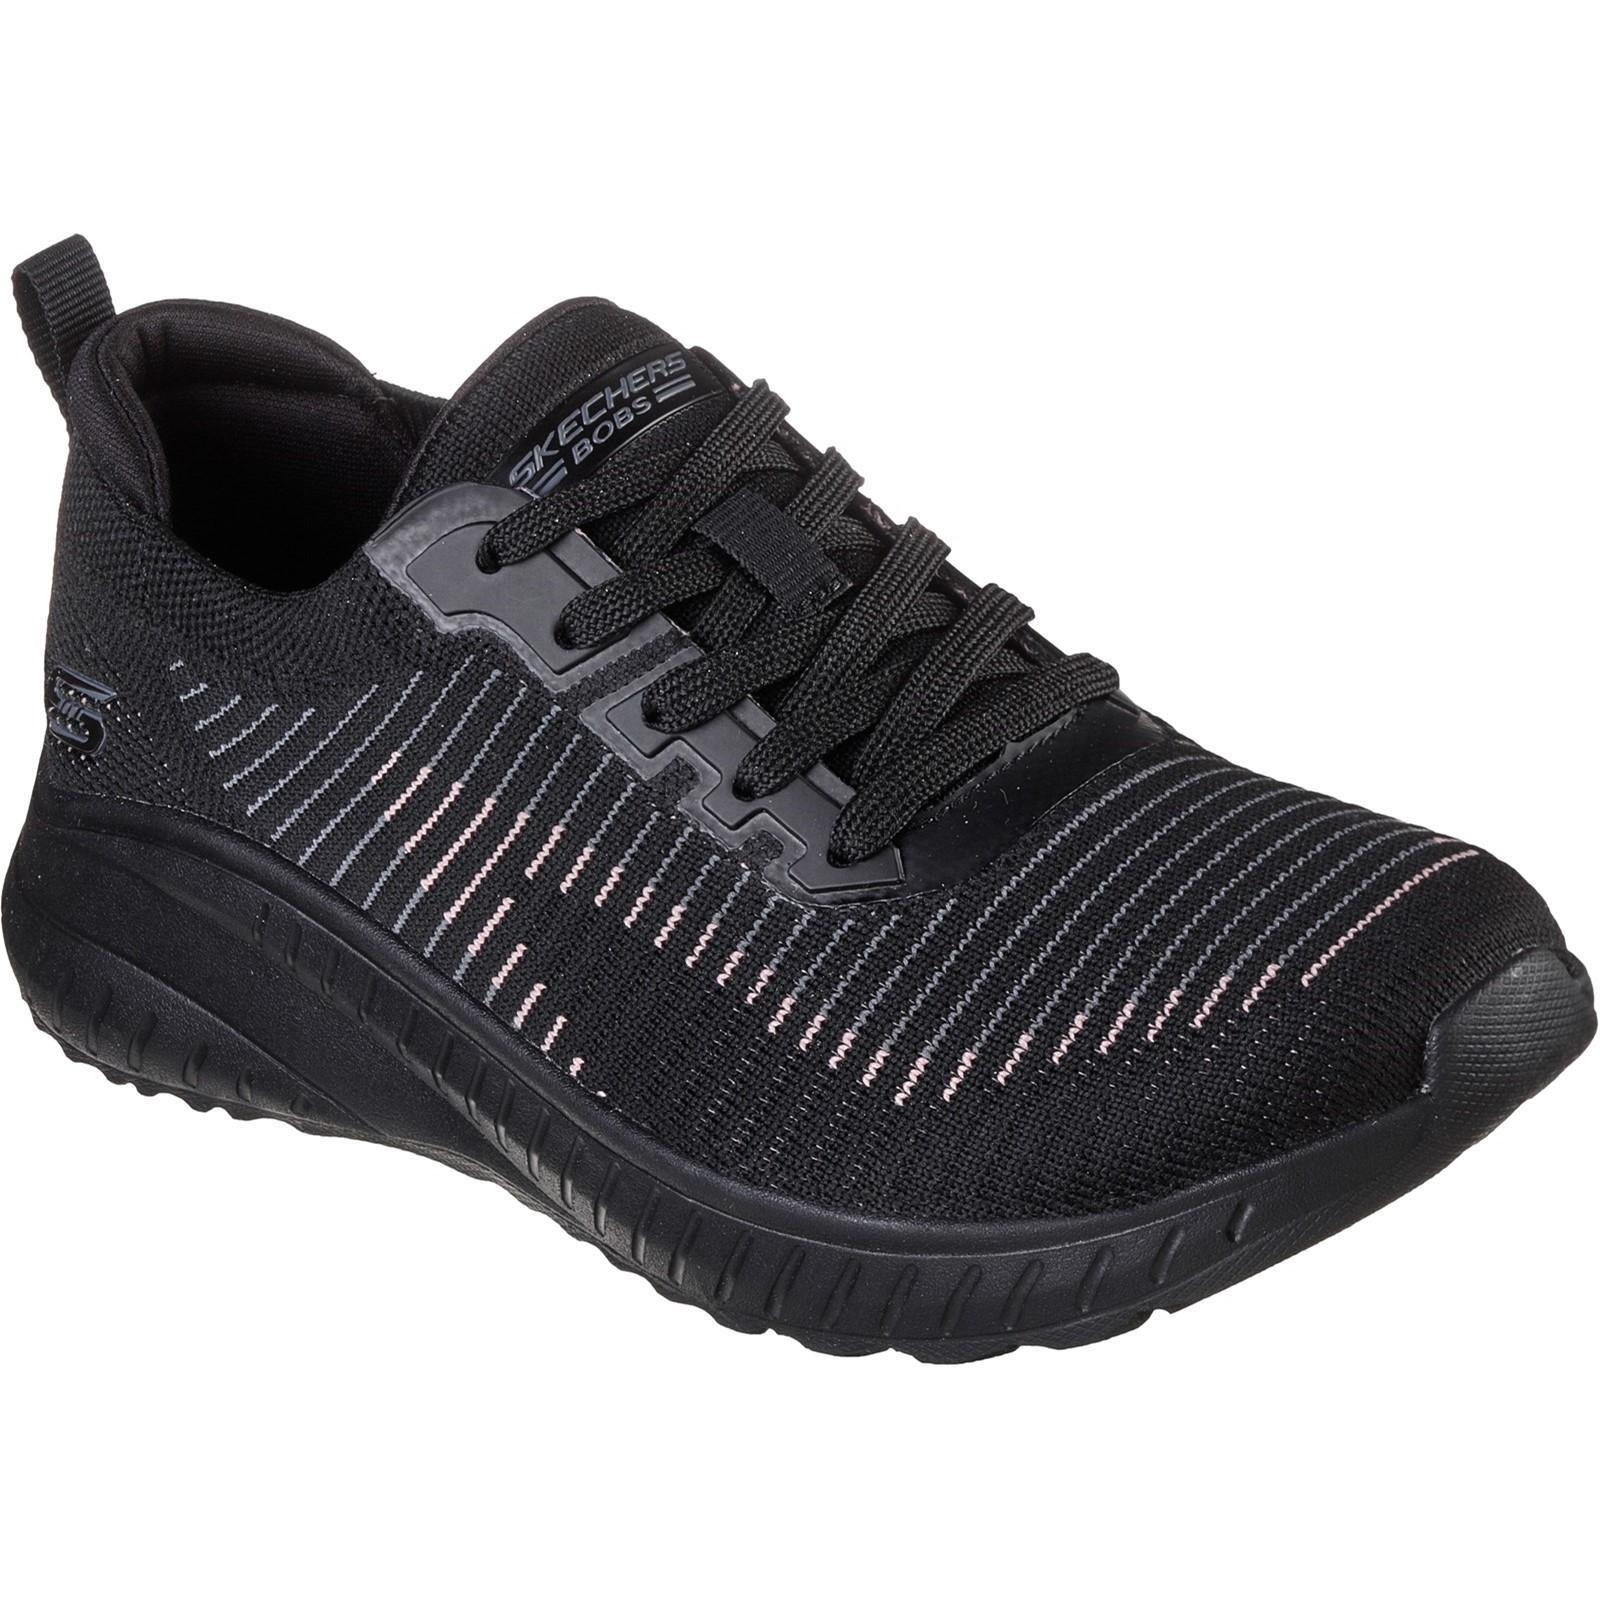 SKECHERS Womens/Ladies Bobs Squad Chaos Renegade Parade Shoes (Black)